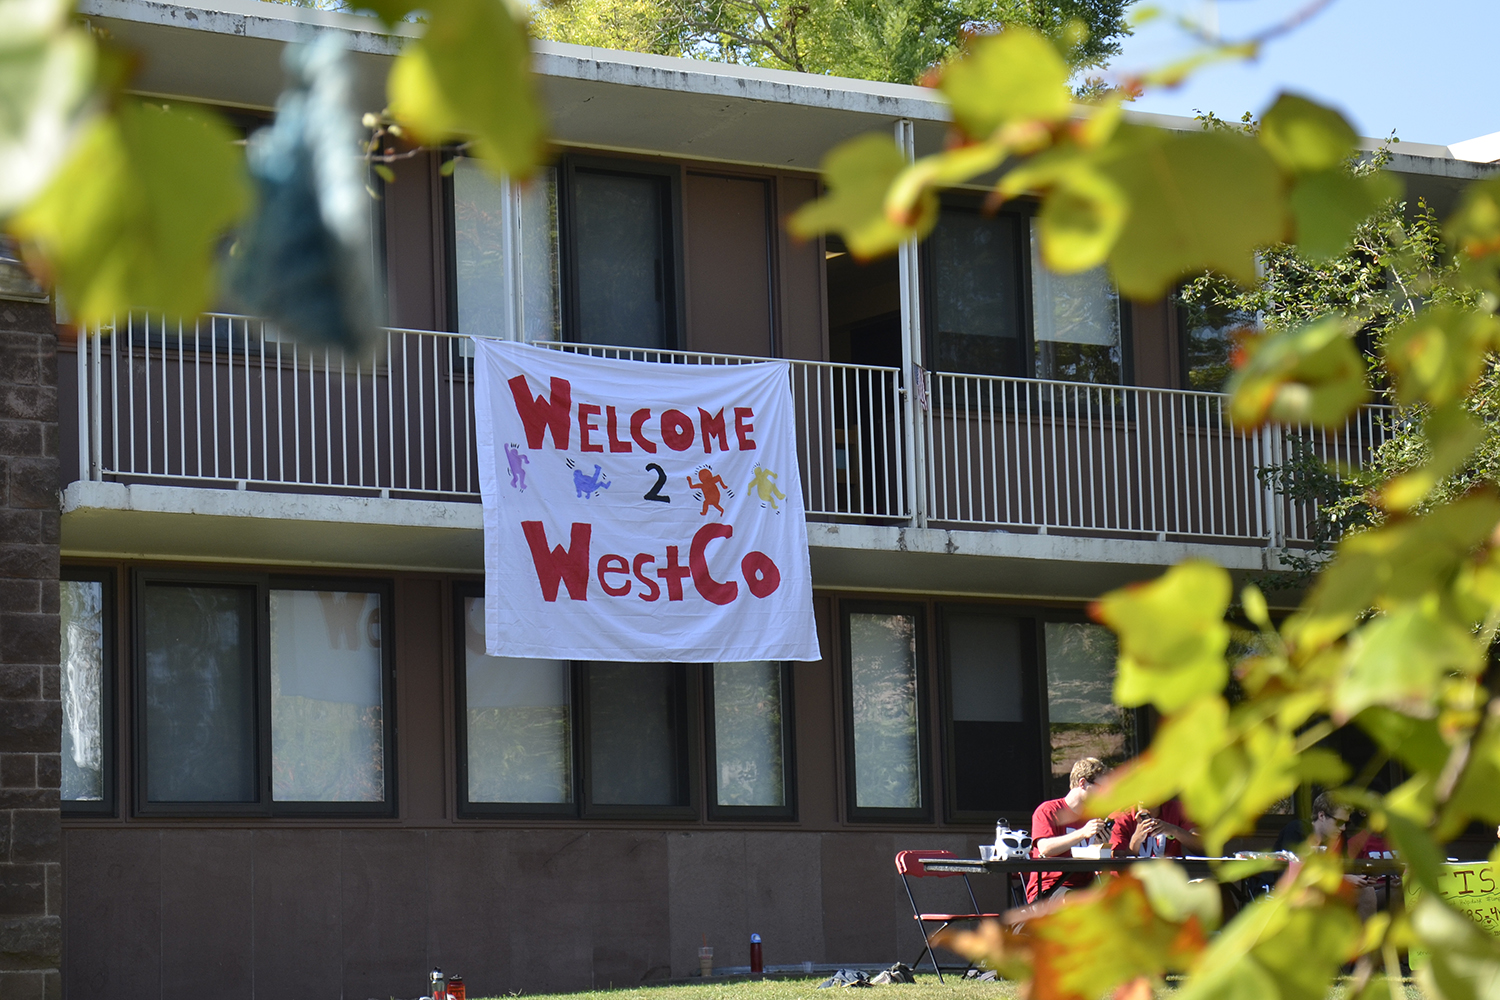 Class of 2018 on Student Arrival Day, Aug. 27, 2014.